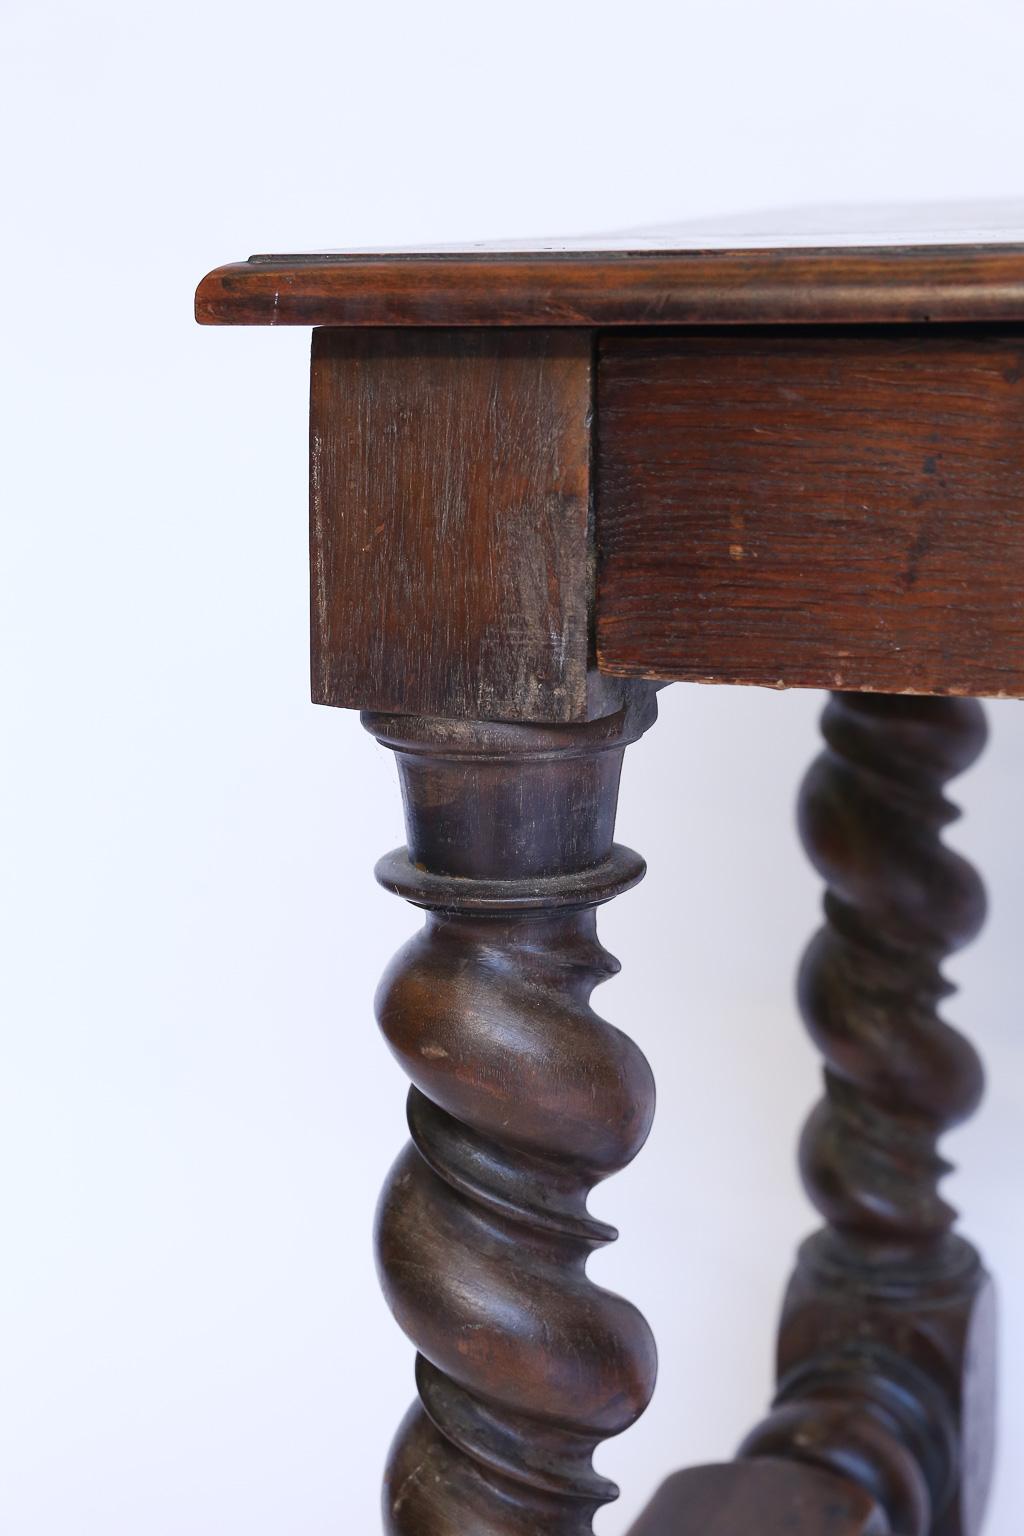 Wood Antique French Turned Leg Table